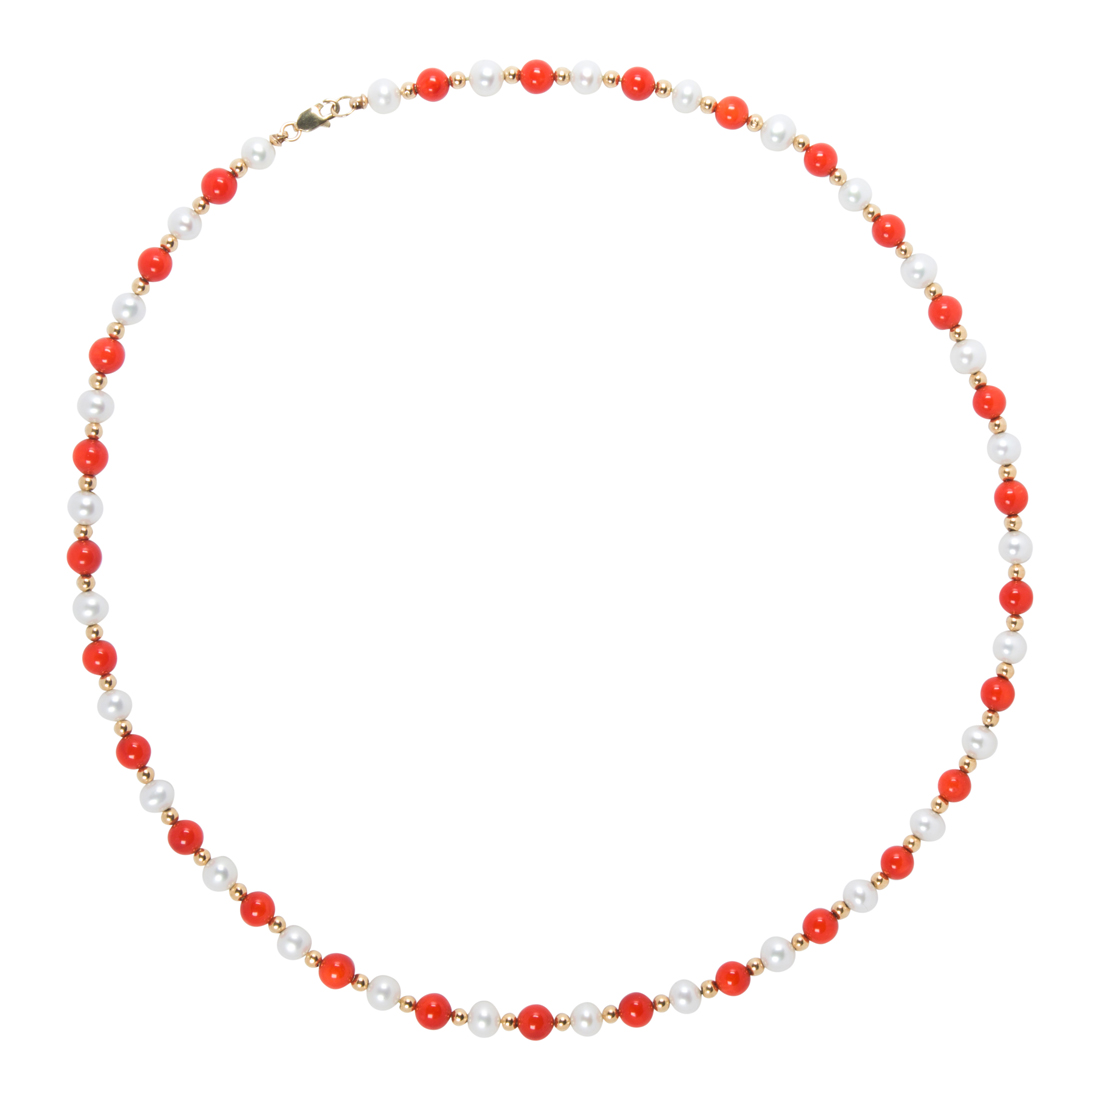 A CORAL, CULTURED PEARL AND 14K